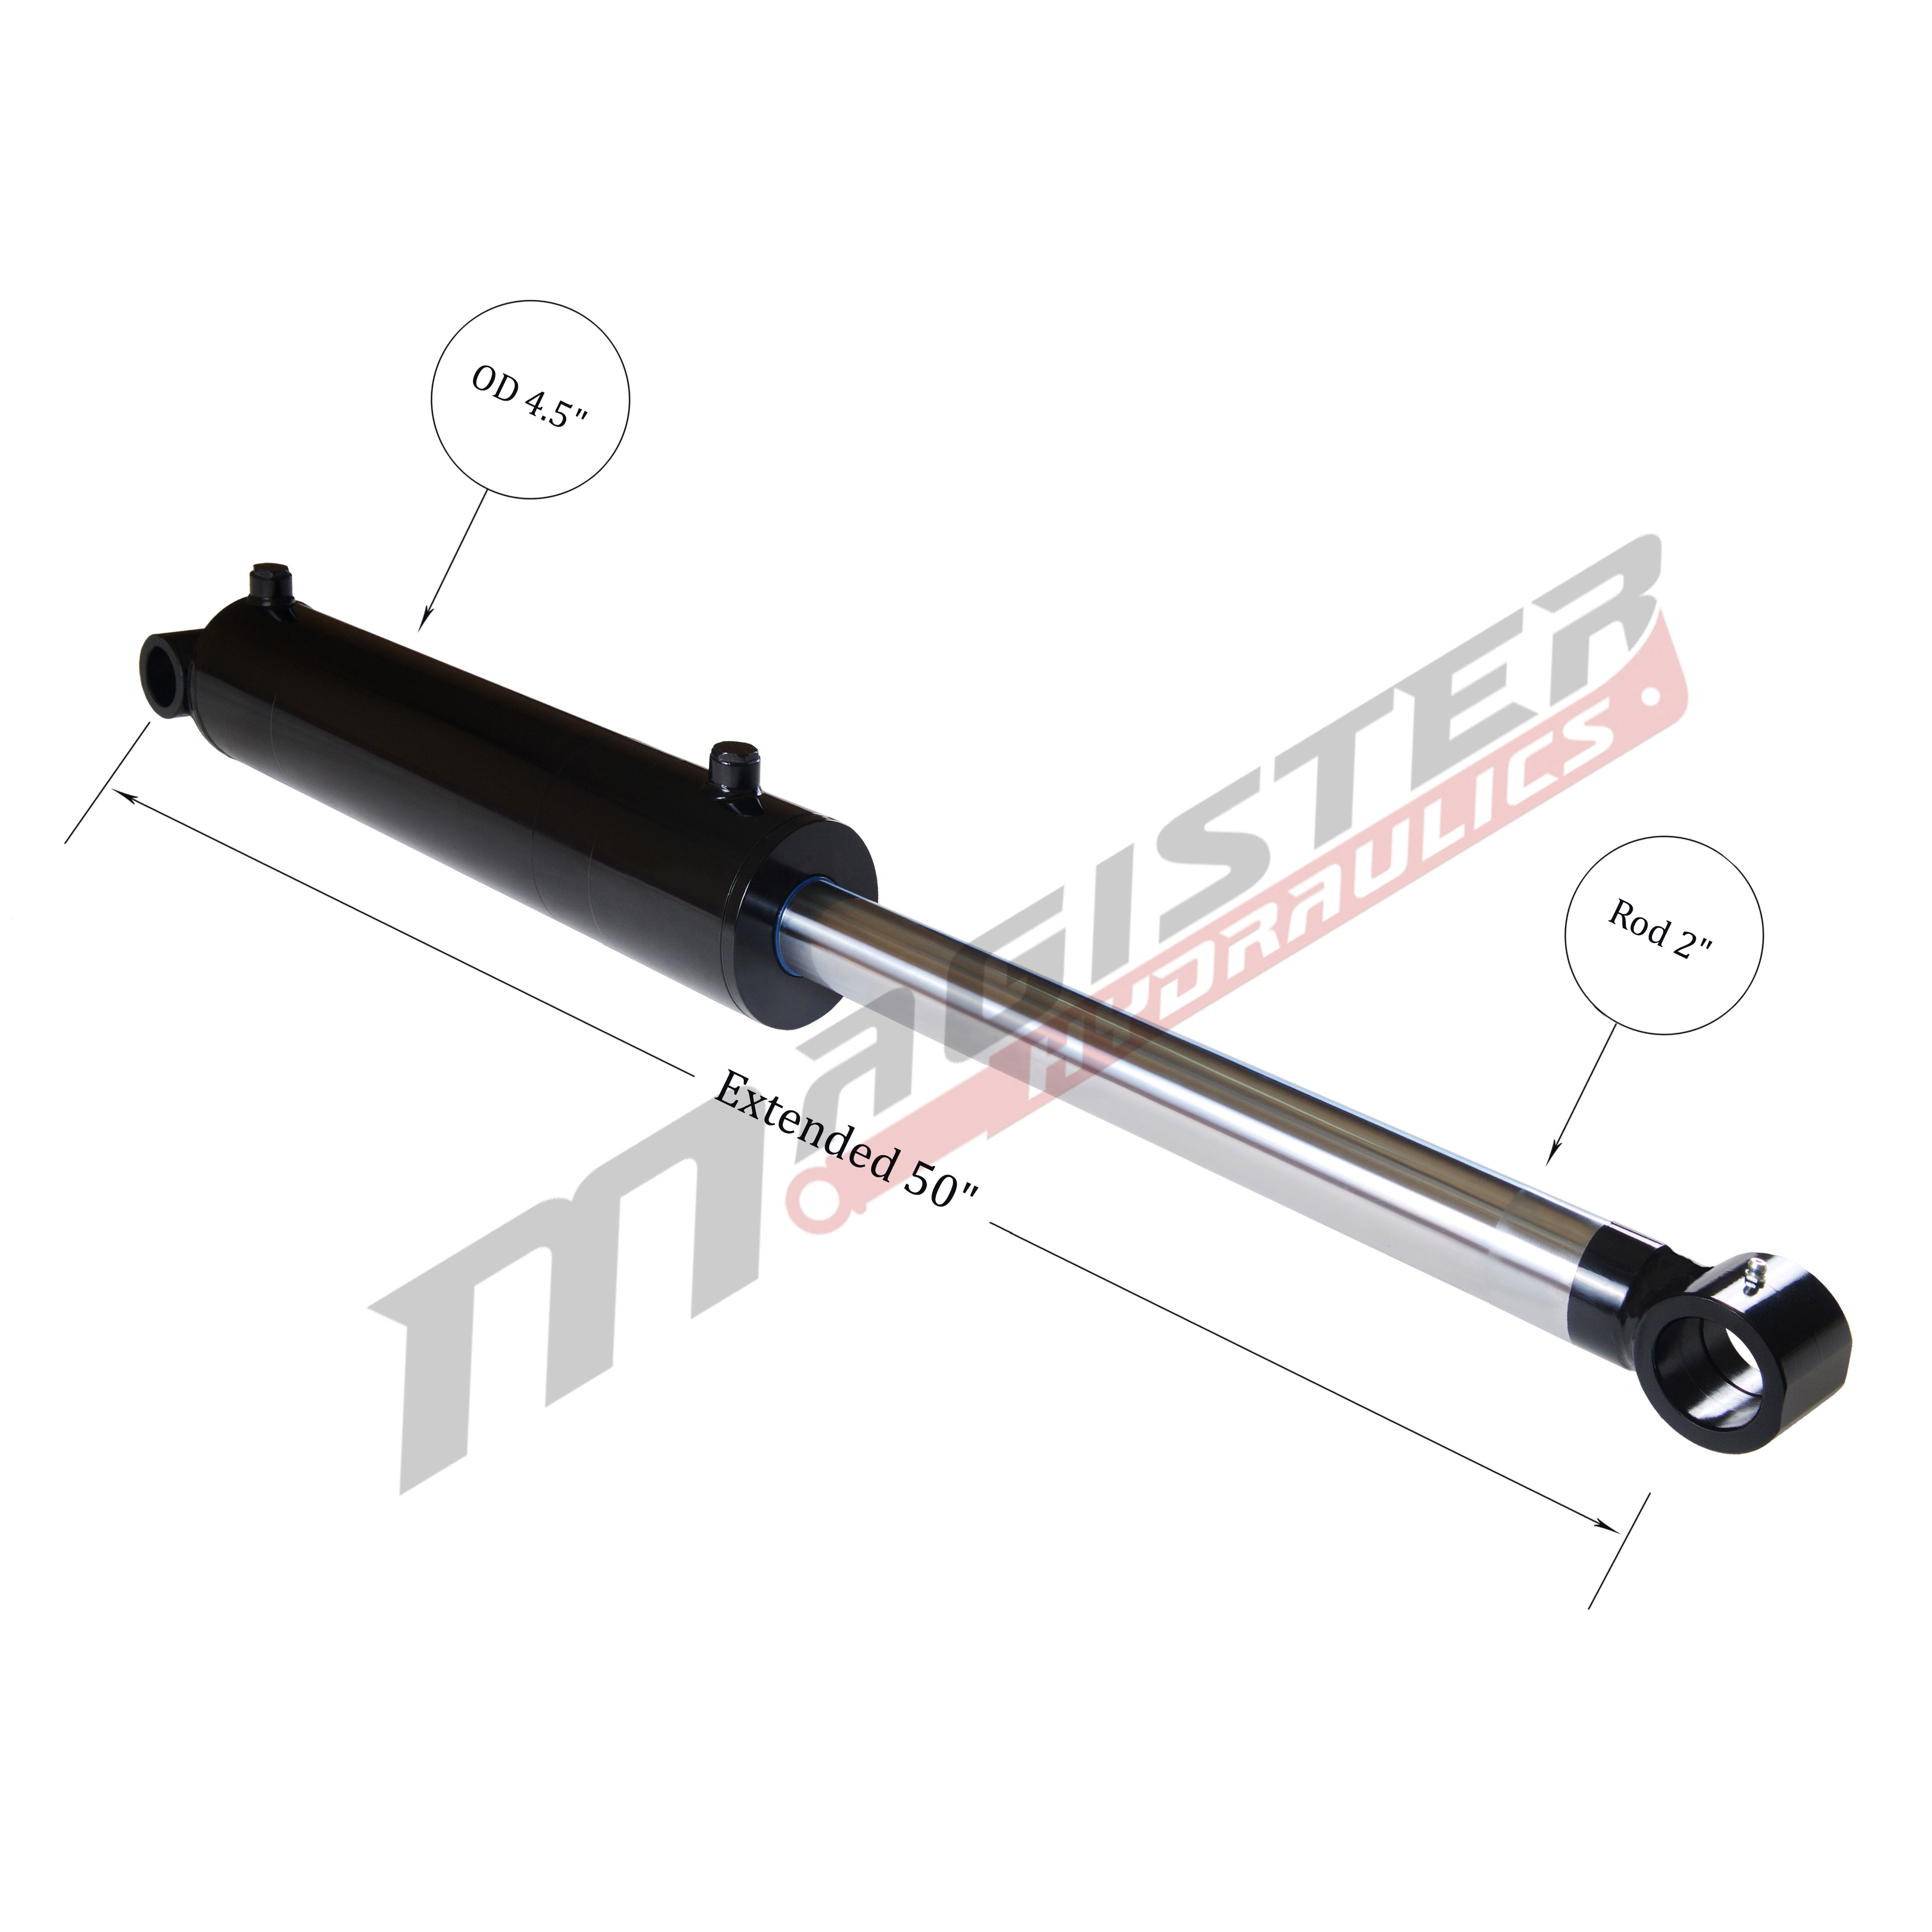 4 bore x 20 stroke hydraulic cylinder, welded cross tube double acting cylinder | Magister Hydraulics